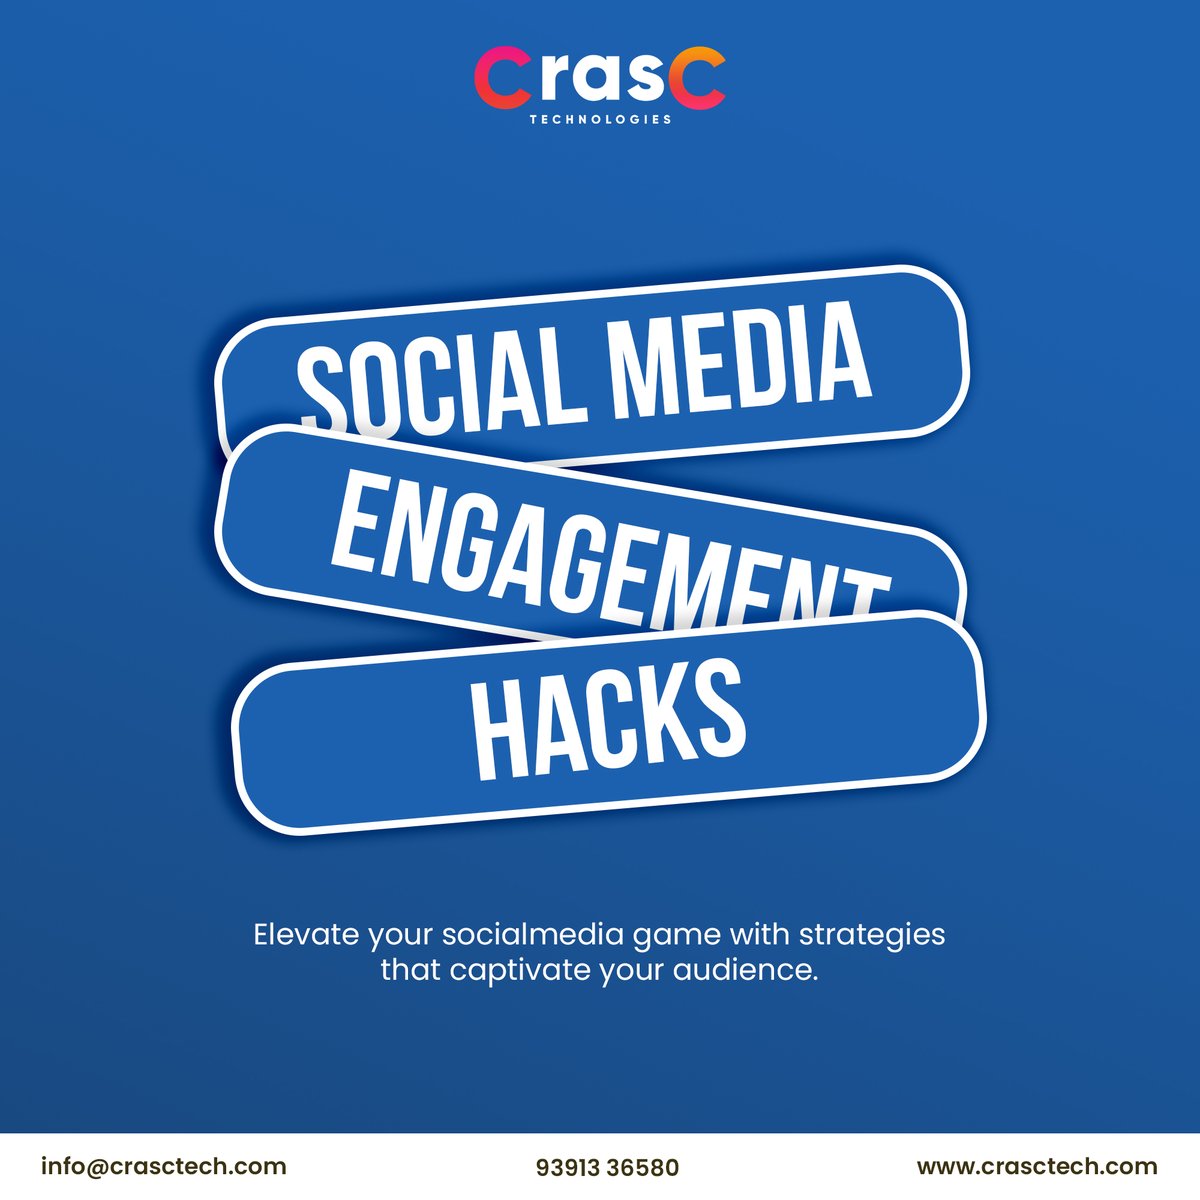 🚀 Ready to skyrocket your social media engagement? 💡 ✨ Crasctech shares expert hacks to elevate your brand's presence and foster genuine connections with your audience.🎯 #crasctech #digitalmarketing #socialmediamarketing #engagements #socialmediahacks #socialmediaexpert